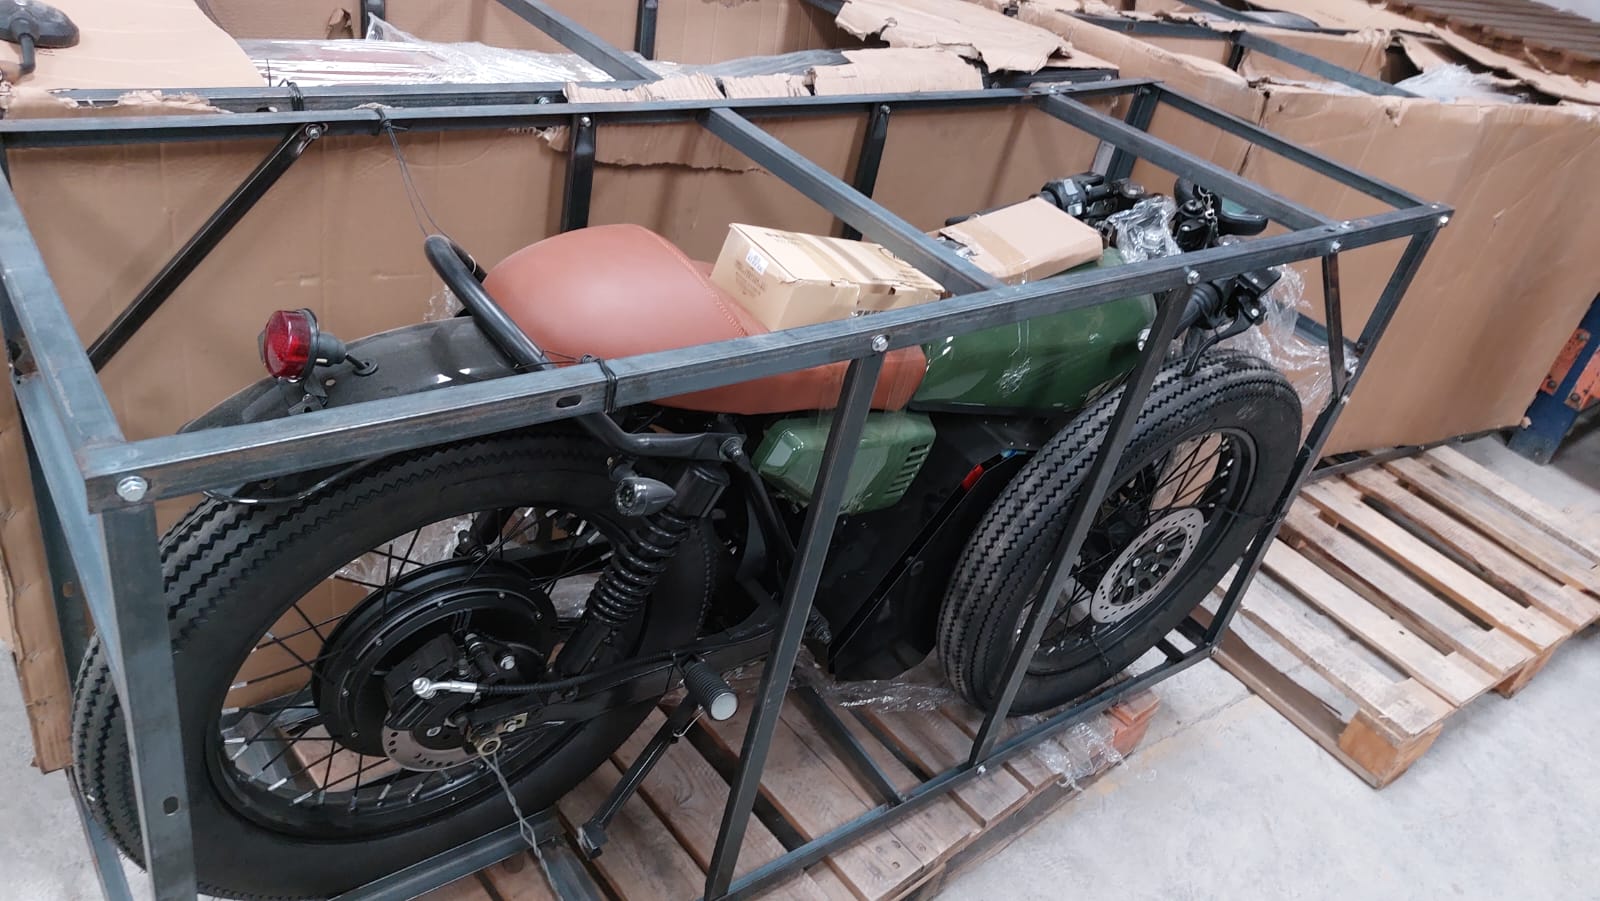 Electric Motorcycle shipments are arriving on schedule in Kenya